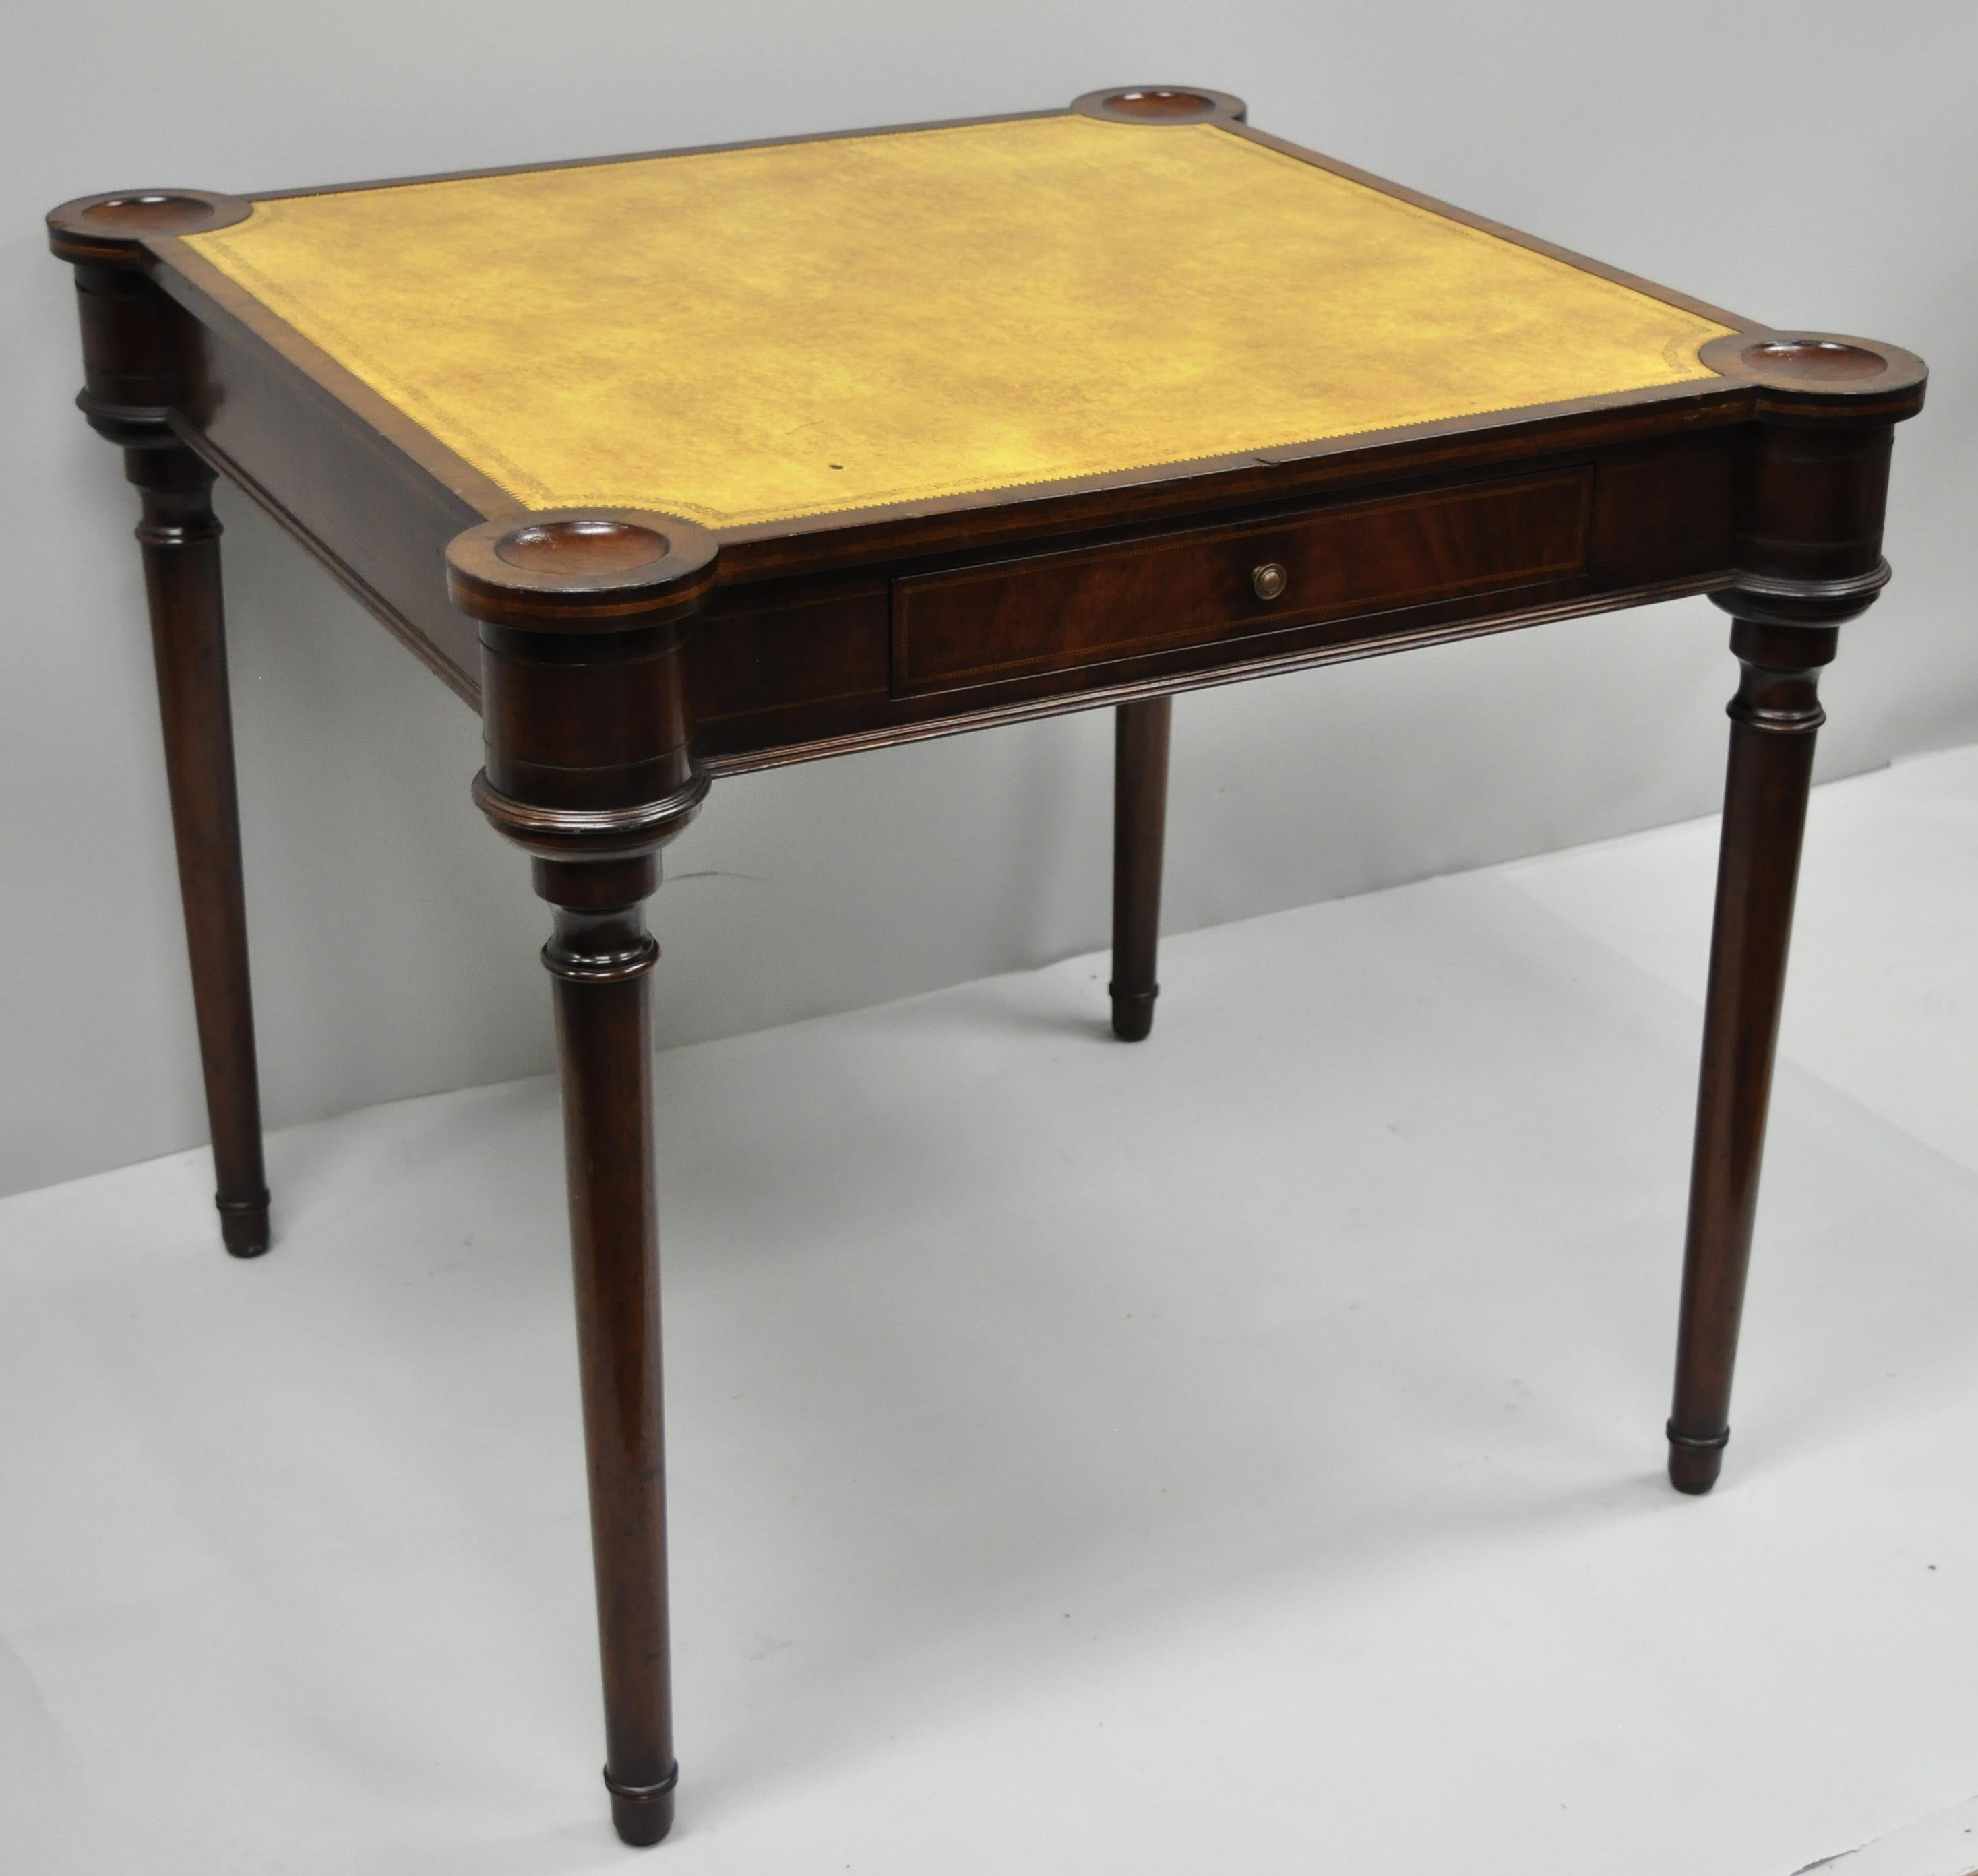 Regency style yellow leather top game table. Item features one dovetailed drawer, yellow tooled leather top, tapered legs, Classic Regency form, circa mid-20th century. Measurements: 28.5